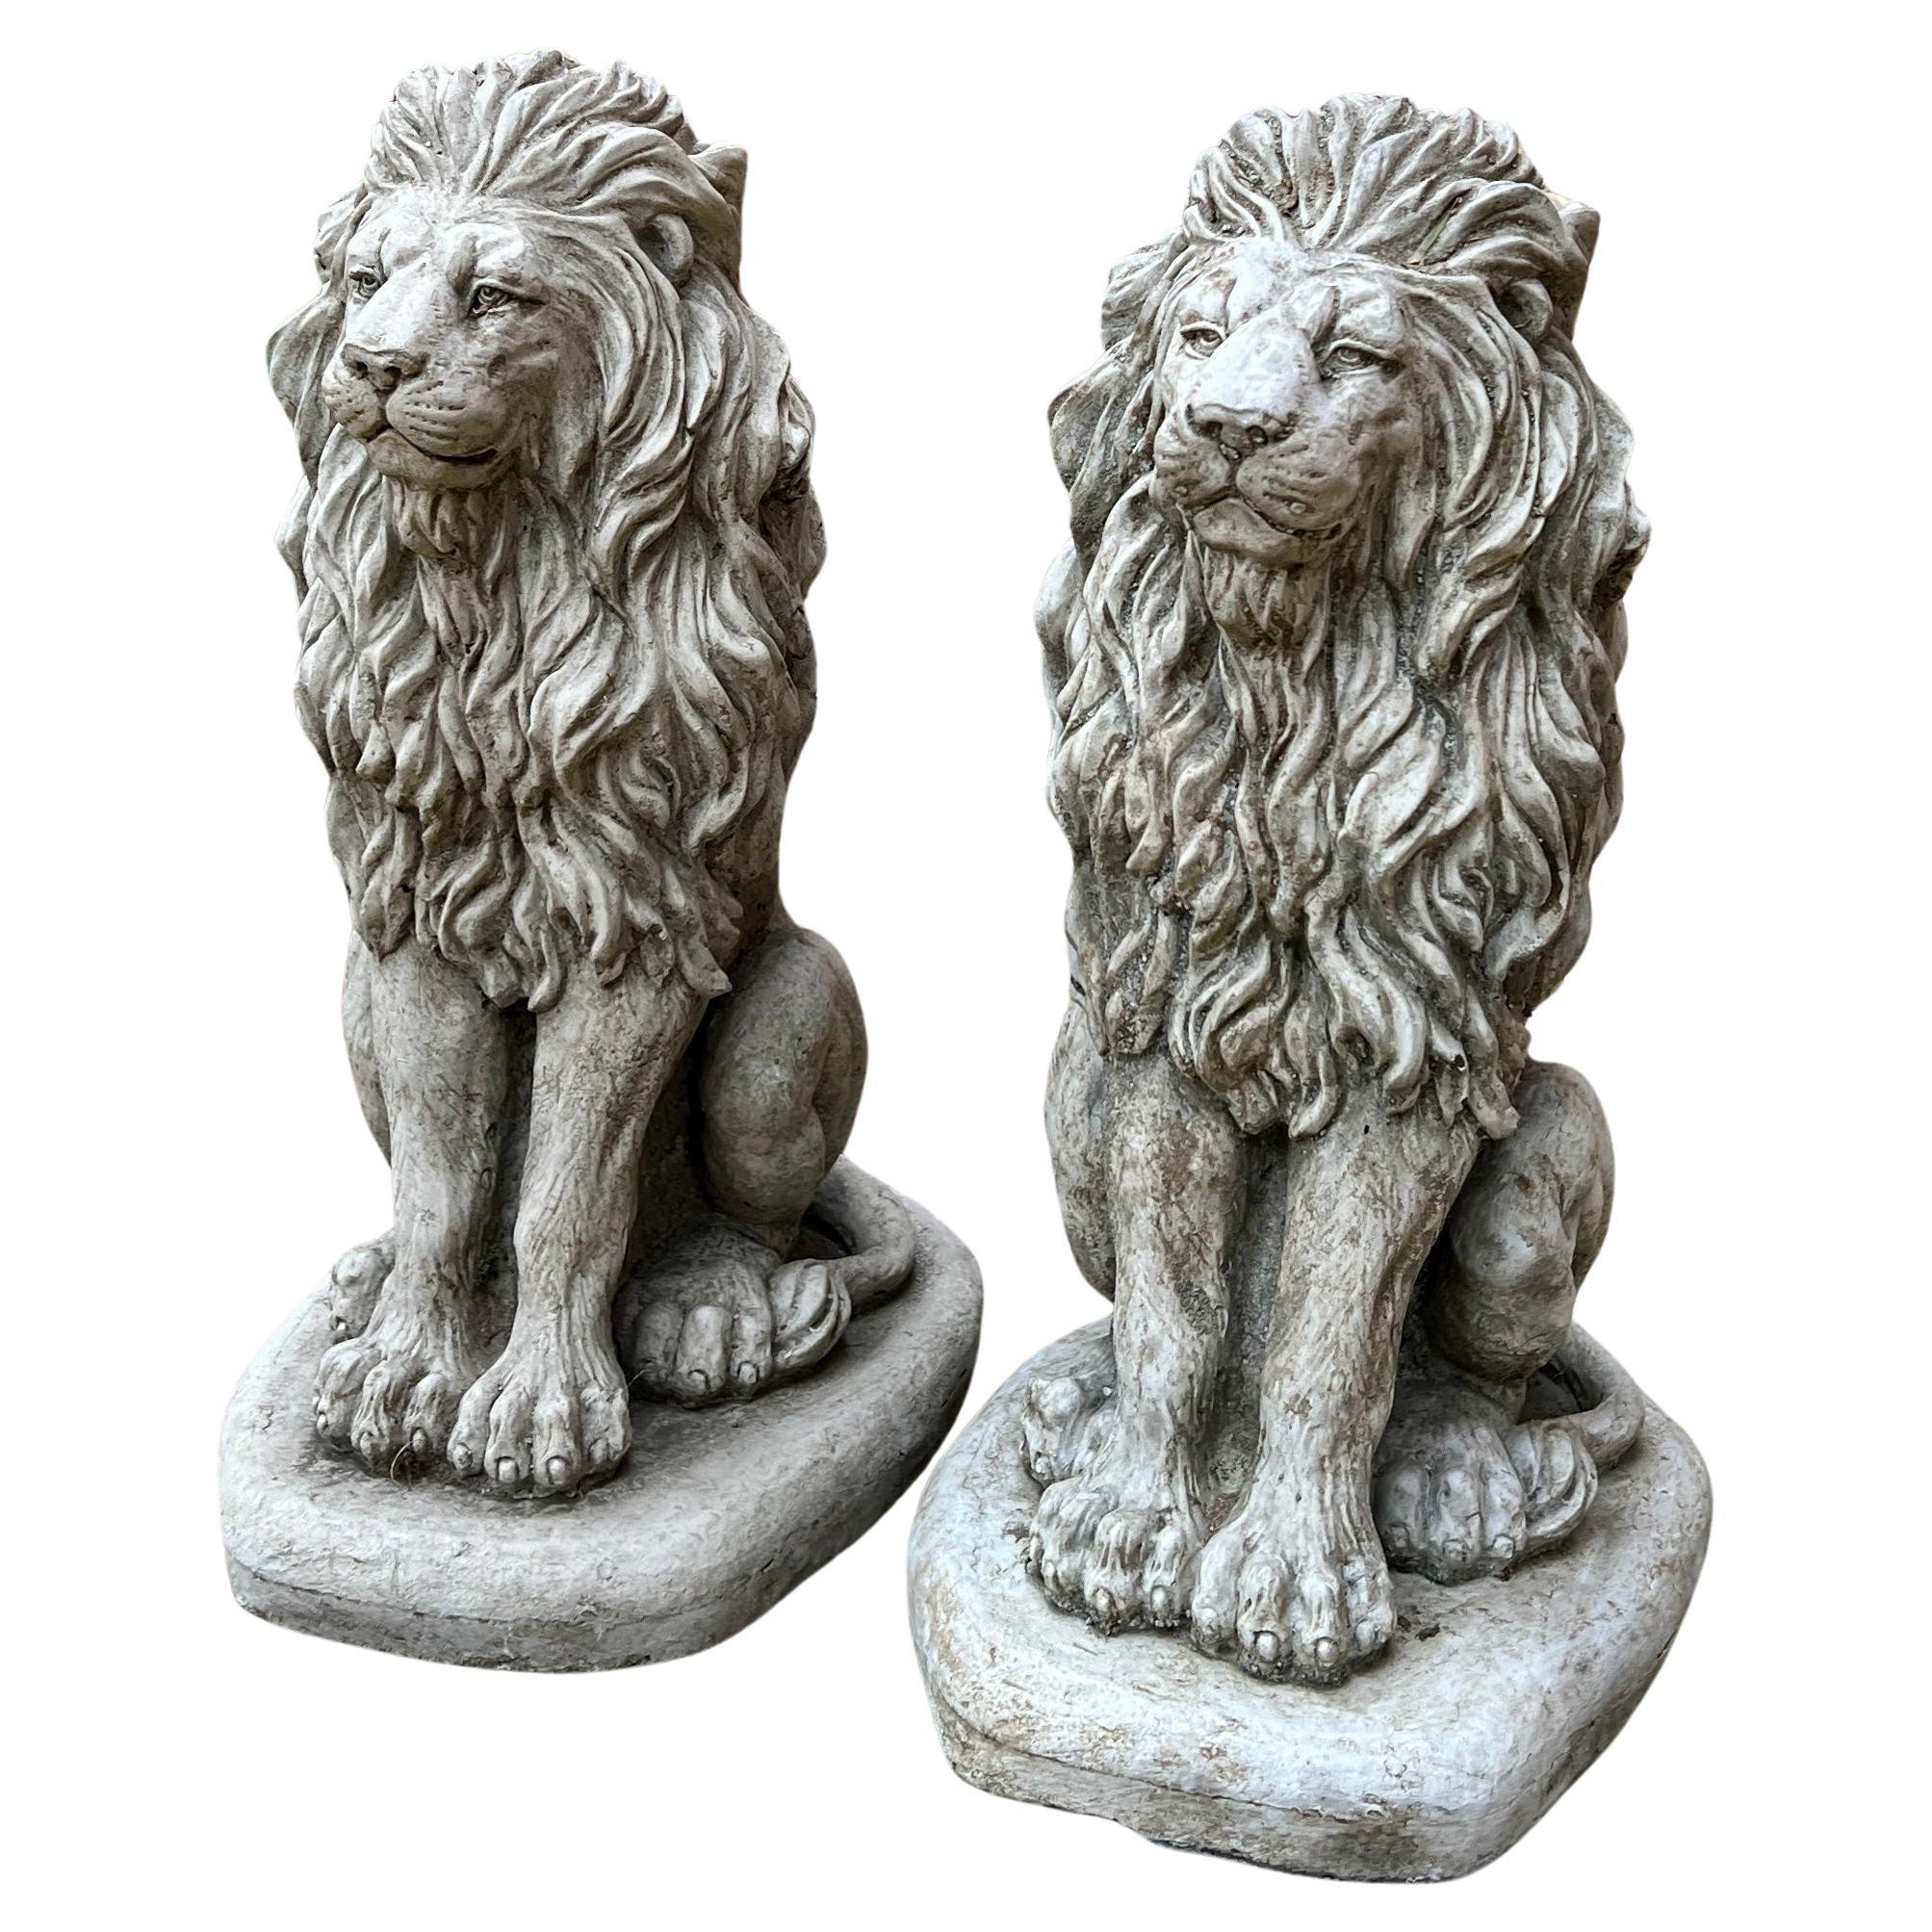 Vintage English Statues LIONS PAIR Garden Figures Cast Stone Yard Decor 16" Tall For Sale